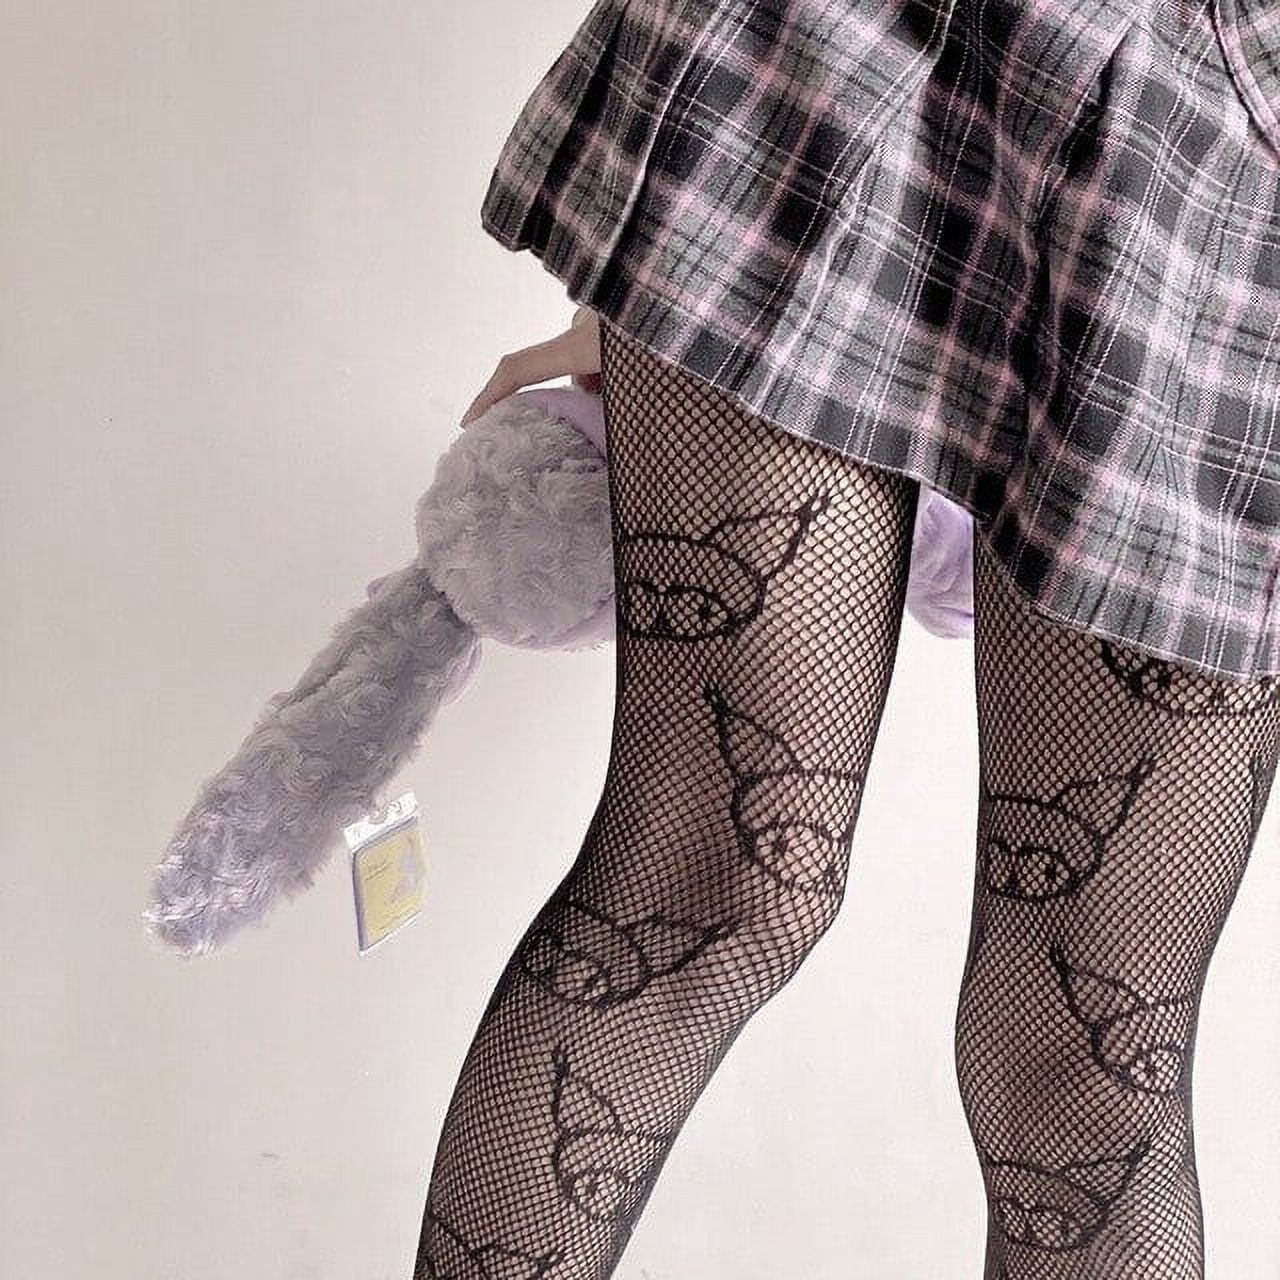 Vintage Hello Kitty Black Fishnet Stockings Tights Pantyhose. Petite Size:  O/S XS-Small NEW!! Still In Package! for Sale in Bellflower, CA - OfferUp